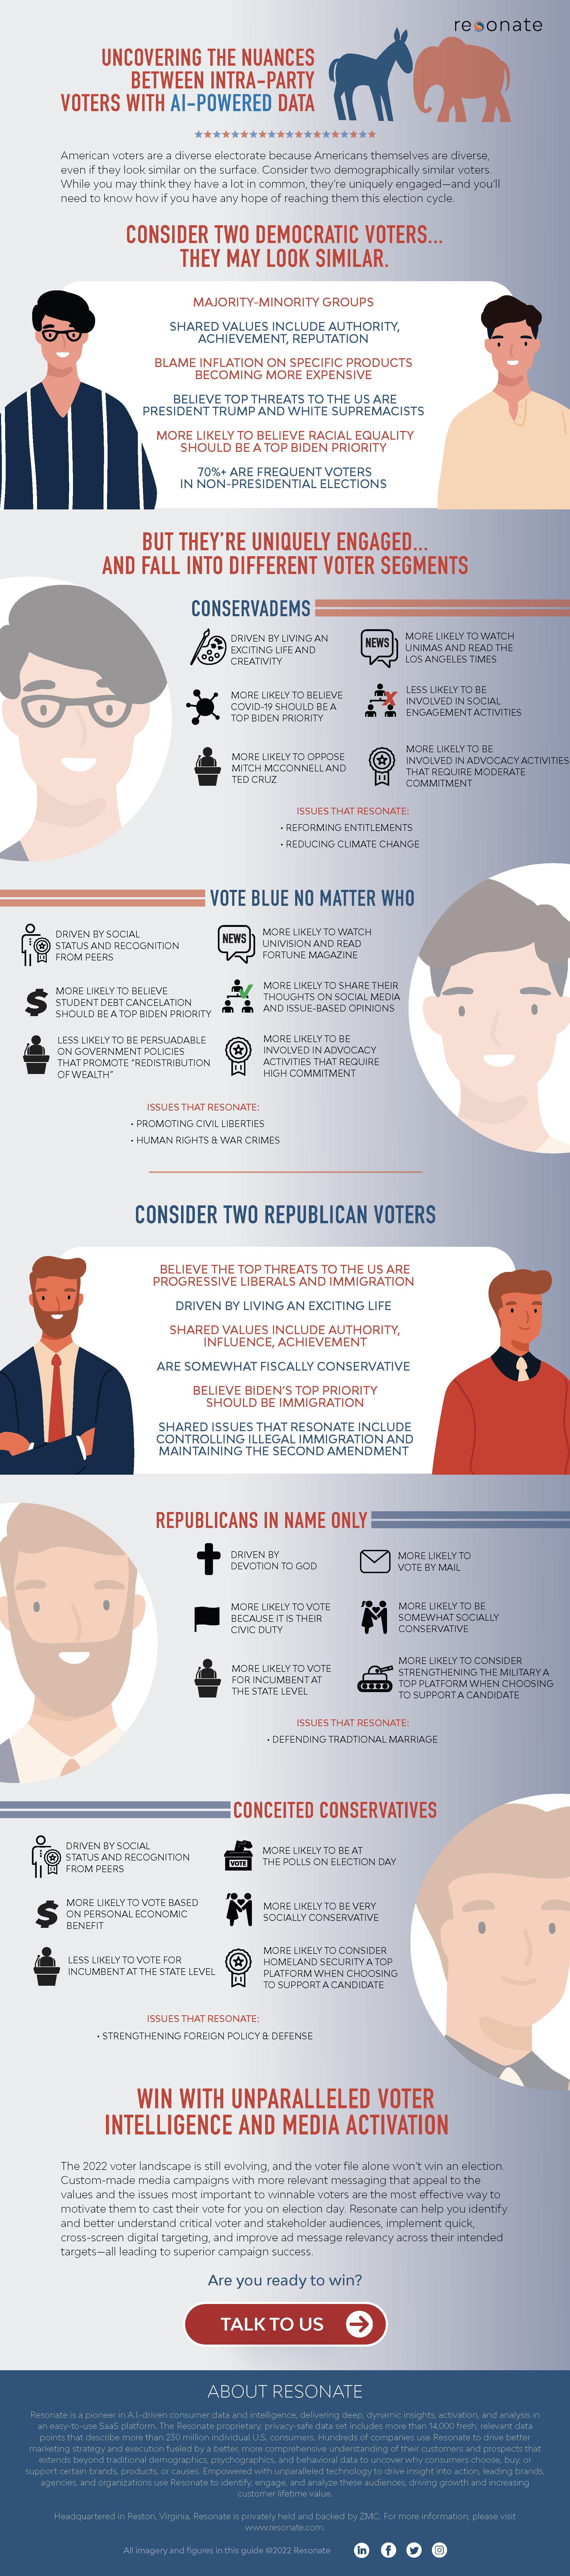 Comparing Political Factions for the 2022 Midterm Elections with Resonate Voter Data